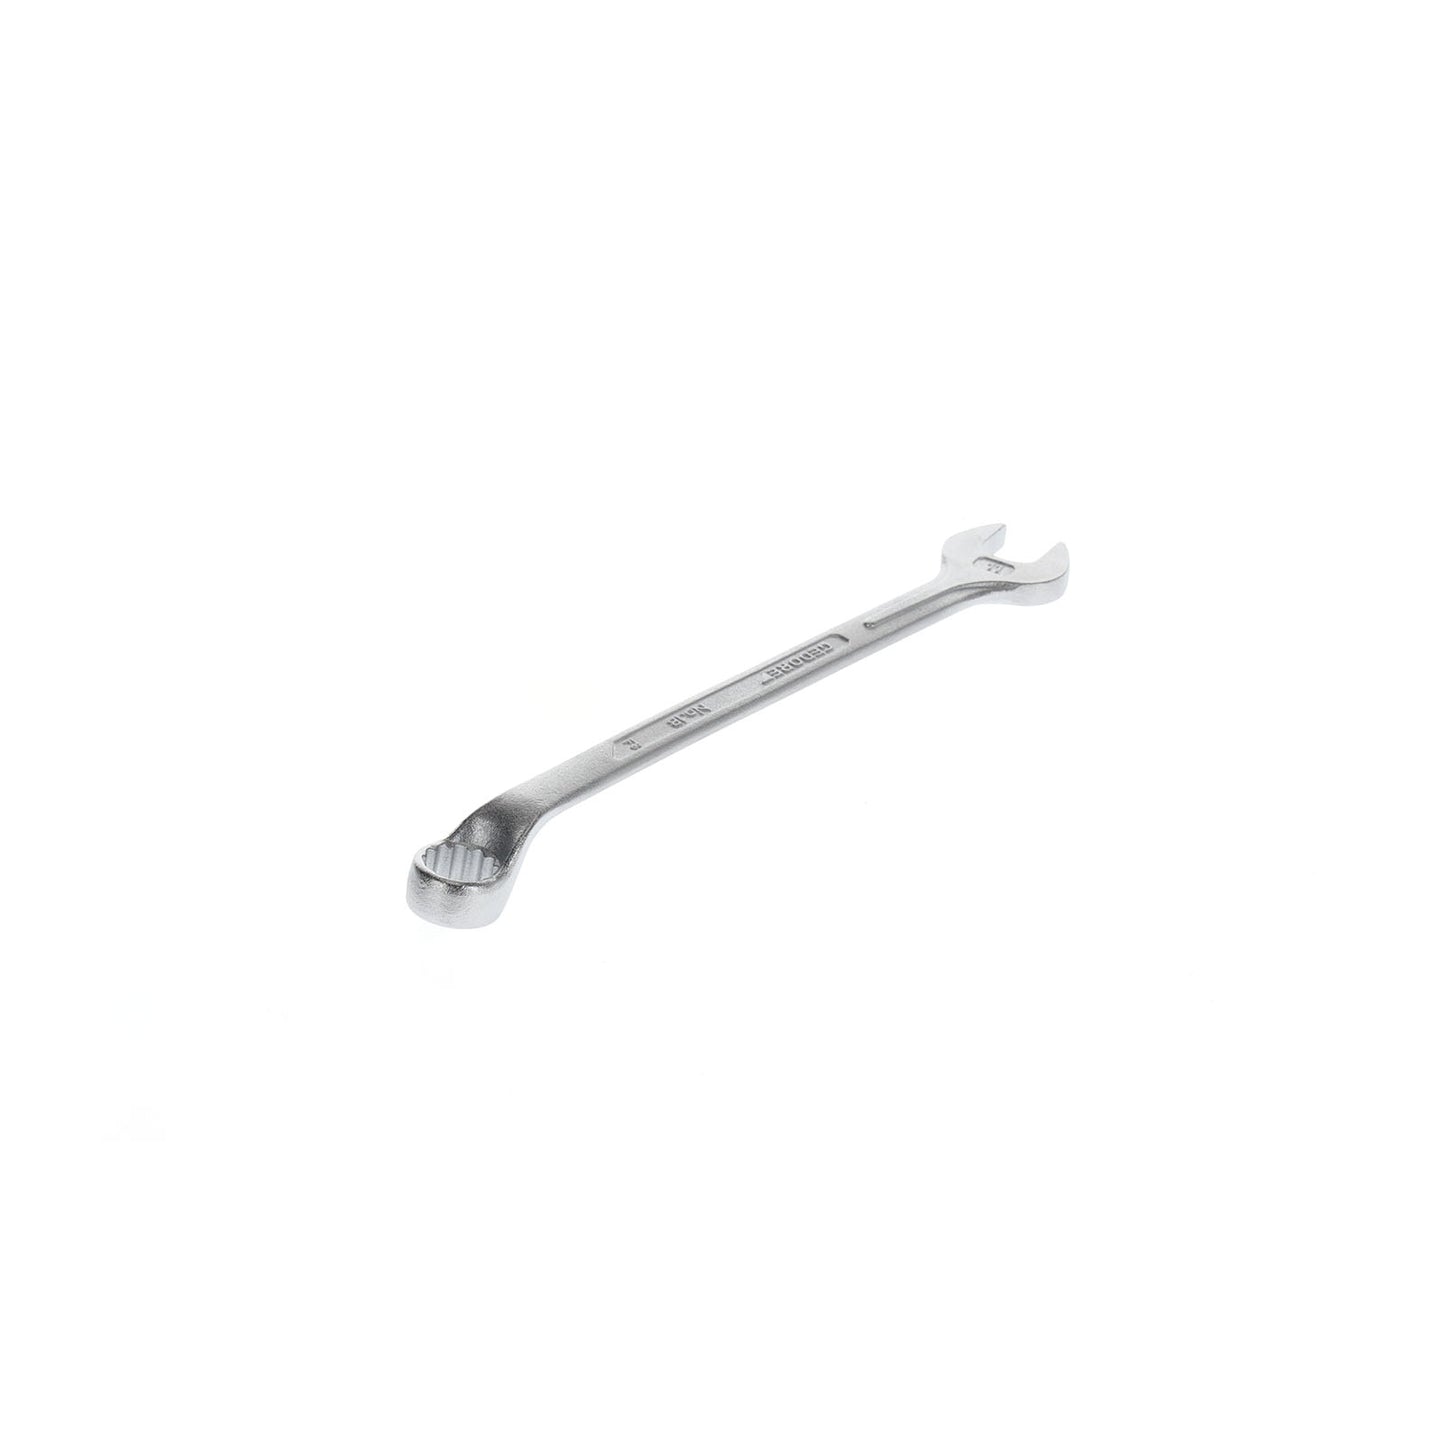 GEDORE 1 B 11 - Offset Combination Wrench, 11mm (6000910)